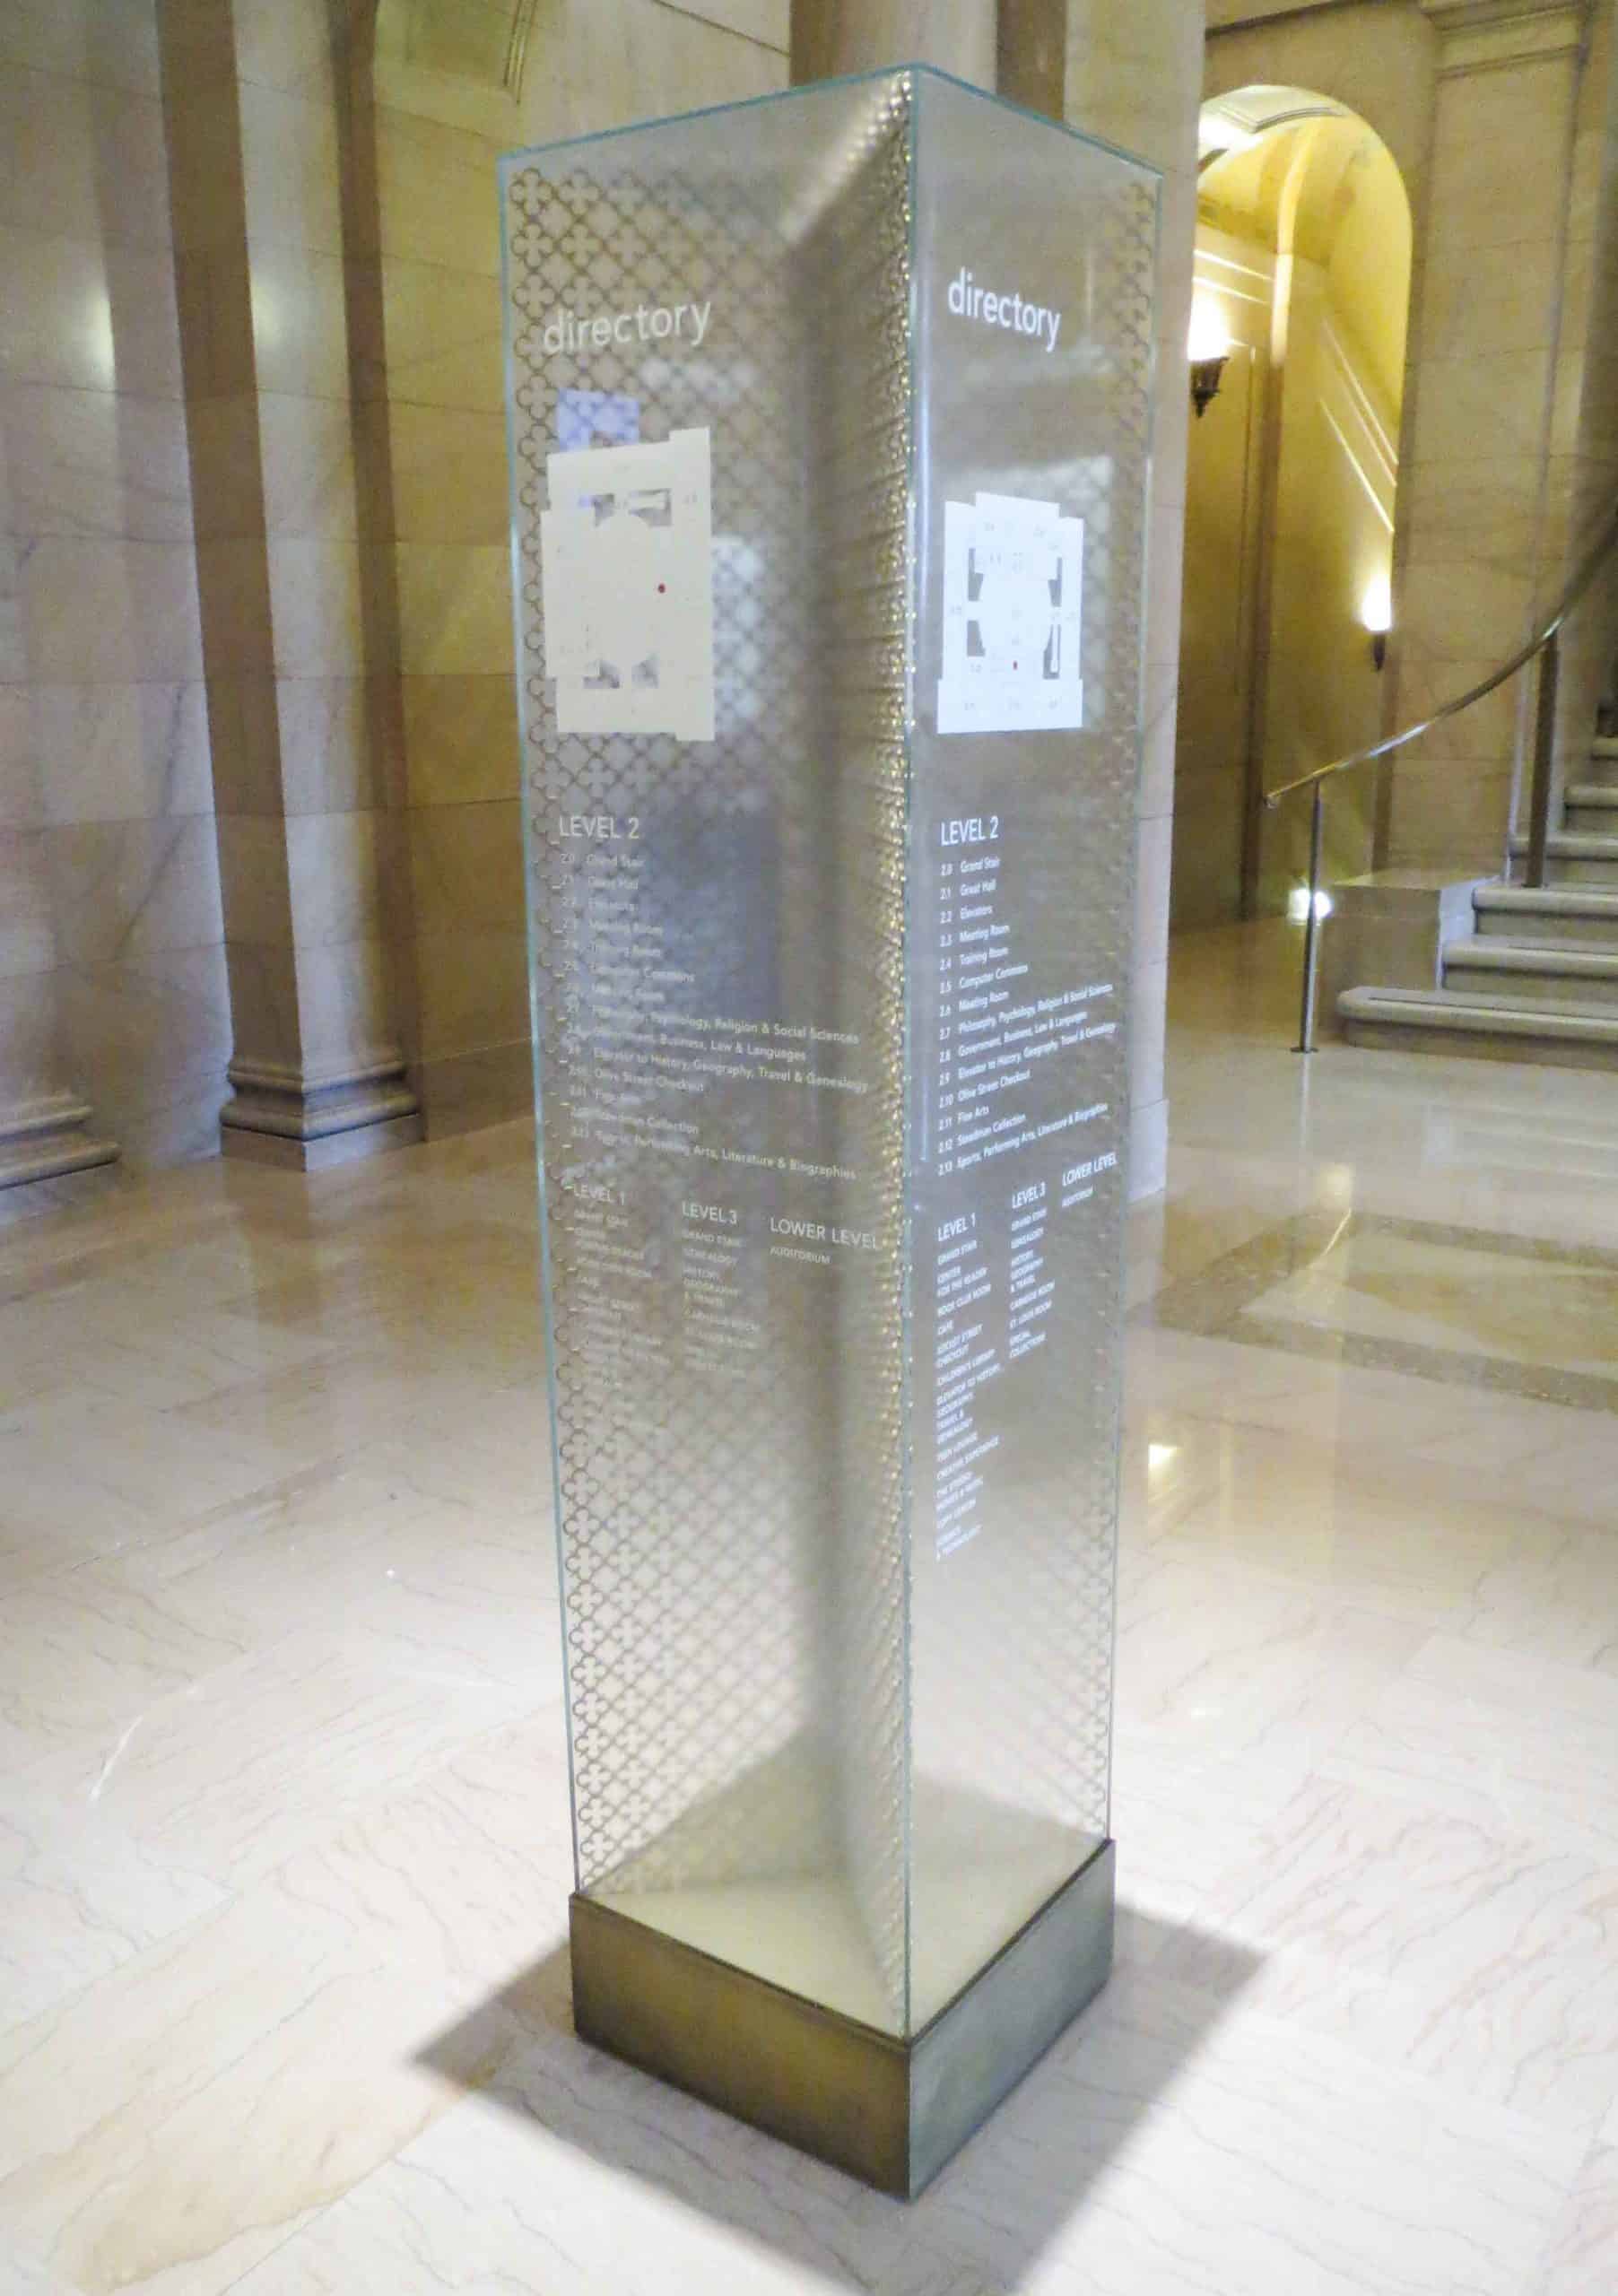 Custom directory for library made of glass panels and vinyl graphic elements